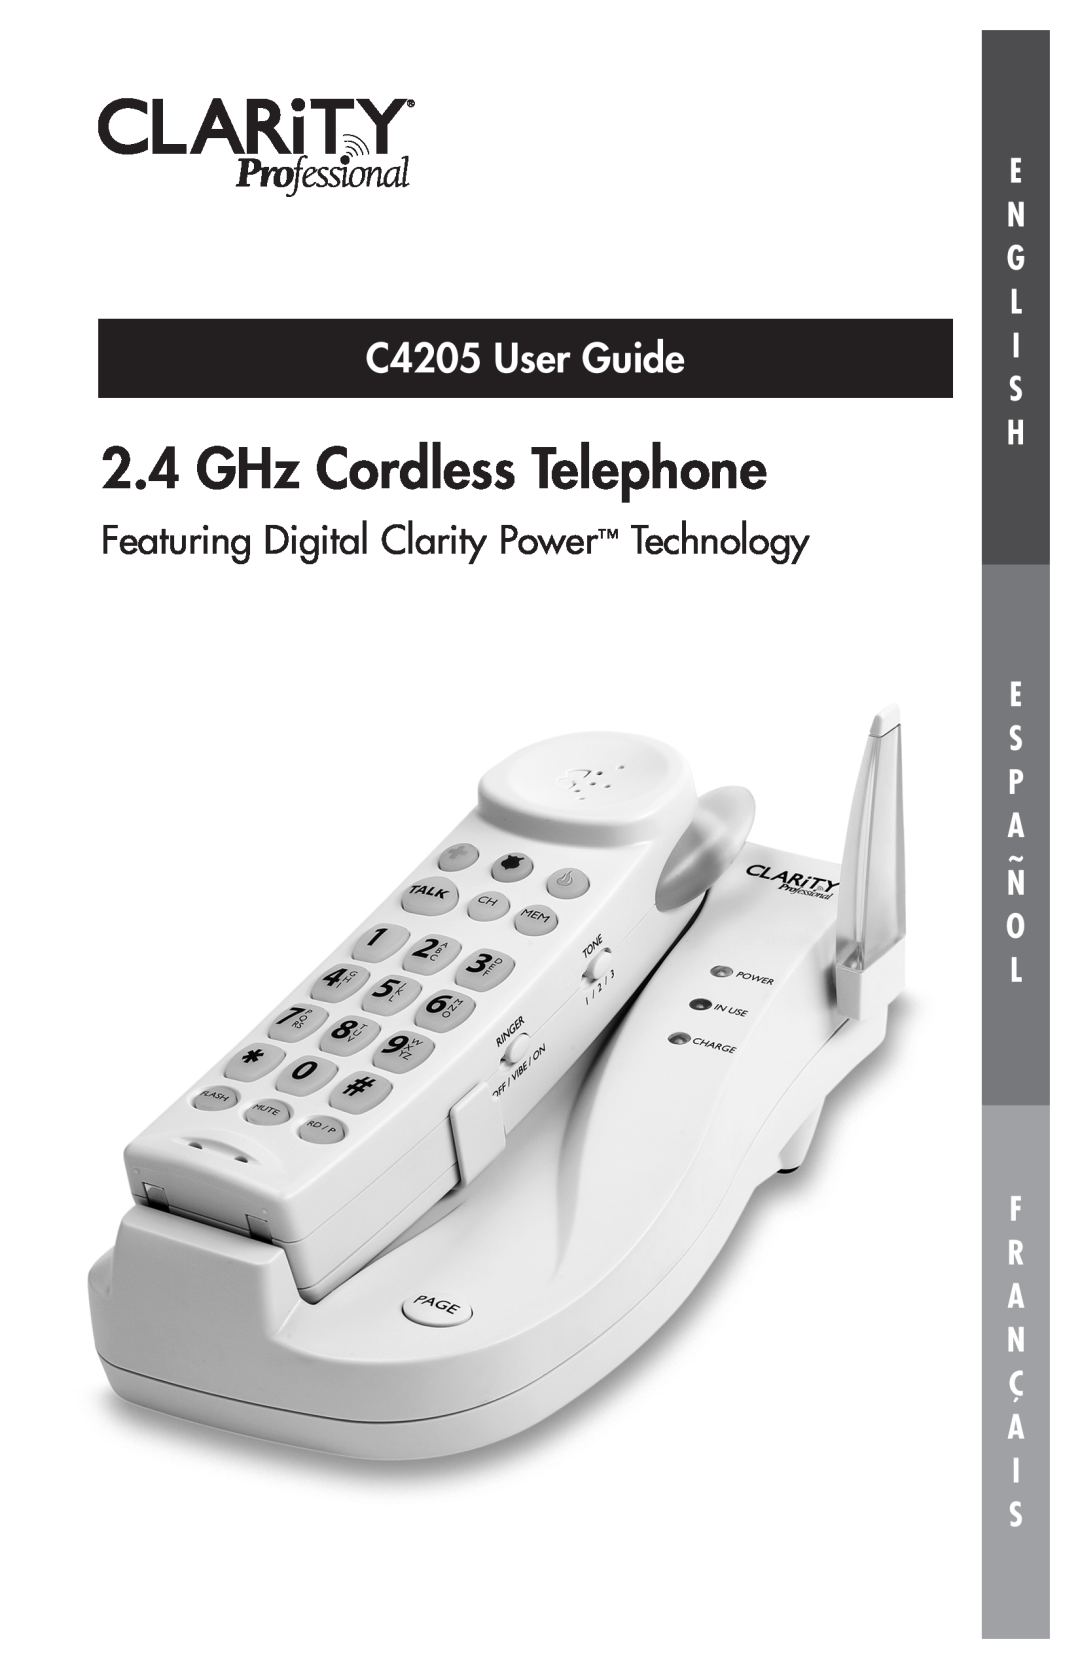 Clarity manual GHz Cordless Telephone, C4205 User Guide, Featuring Digital Clarity Power Technology, Ç A I S, R A N 